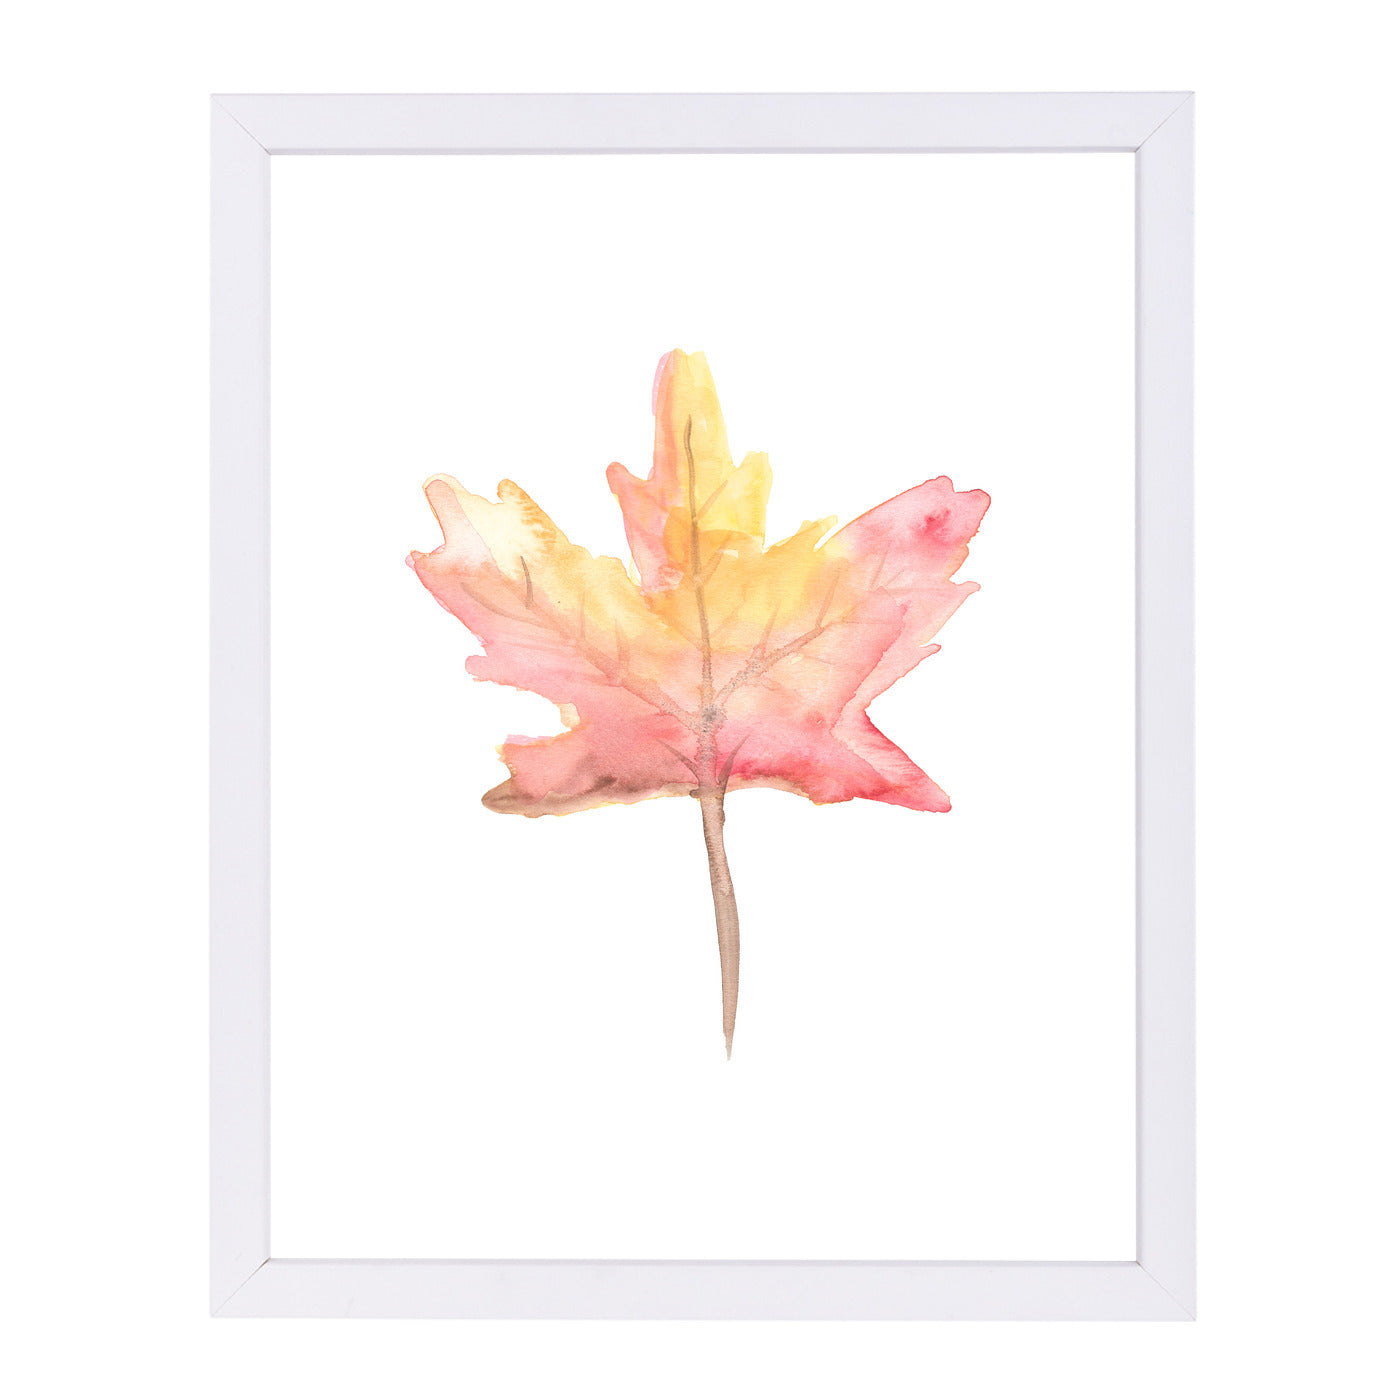 Watercolor Autumnal Fall Leaf by Jetty Printables Framed Print - Americanflat